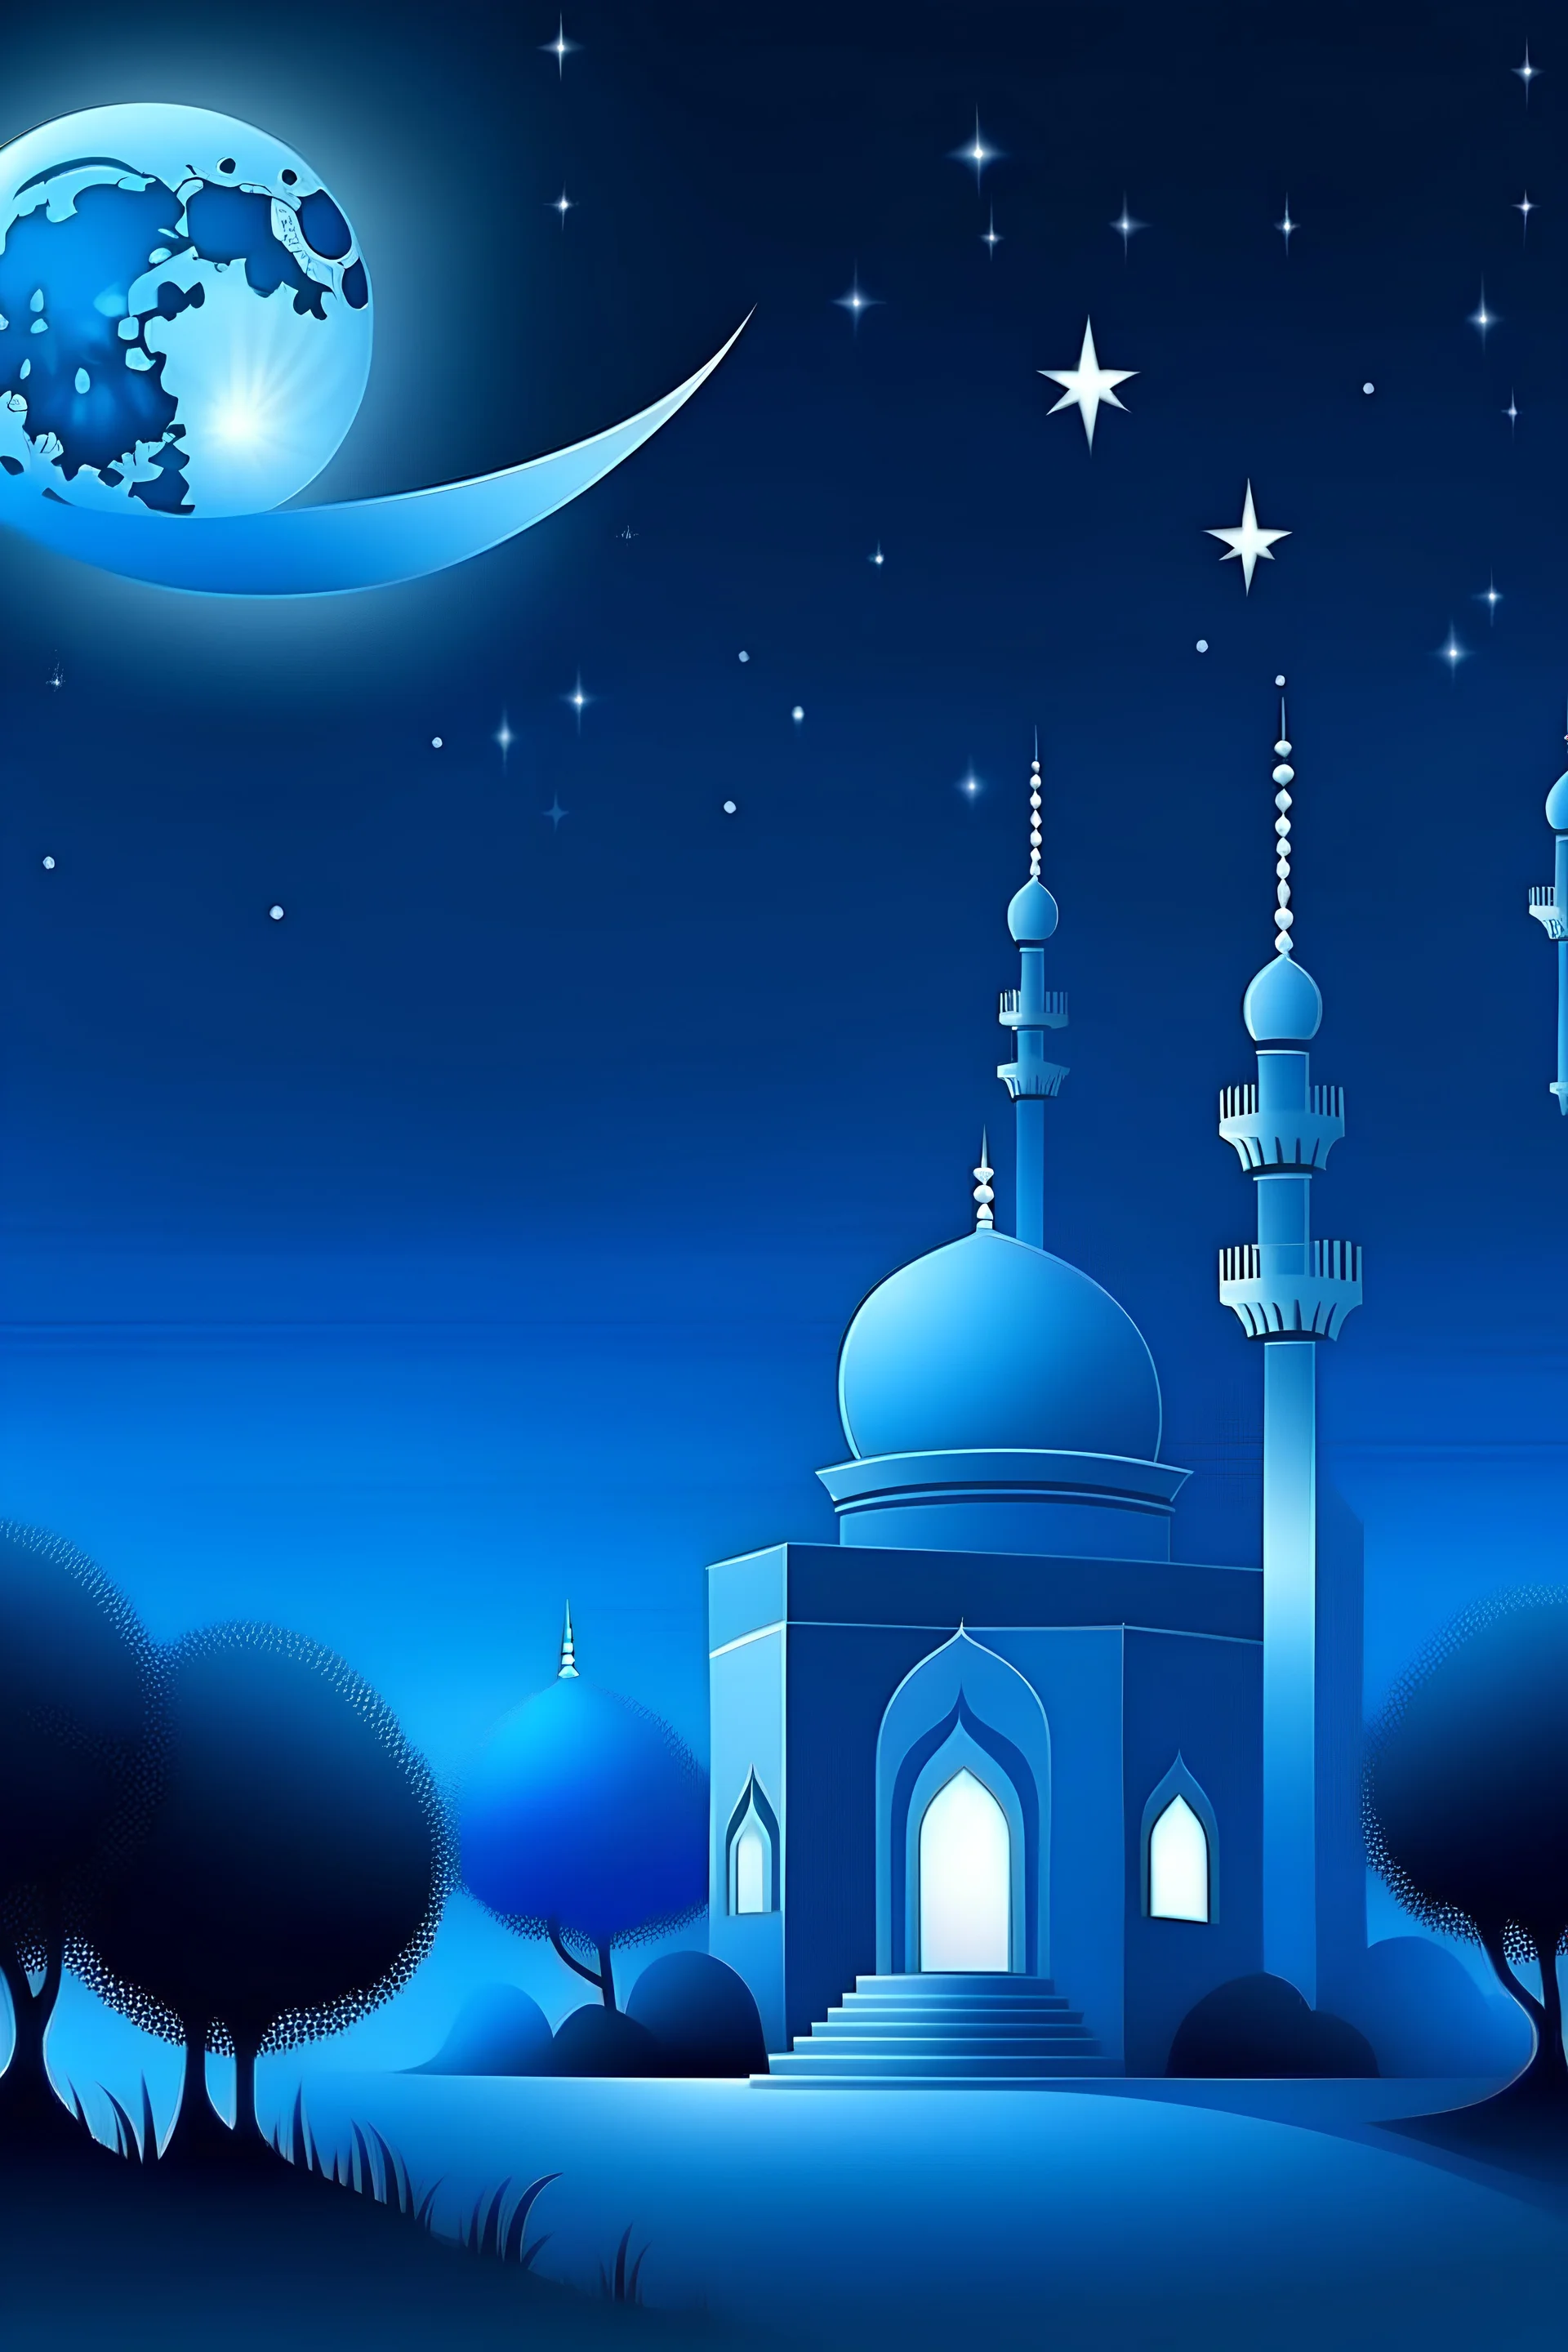 imagine a nigh view with stars, moon, white blue light, tree, mosque realistic view